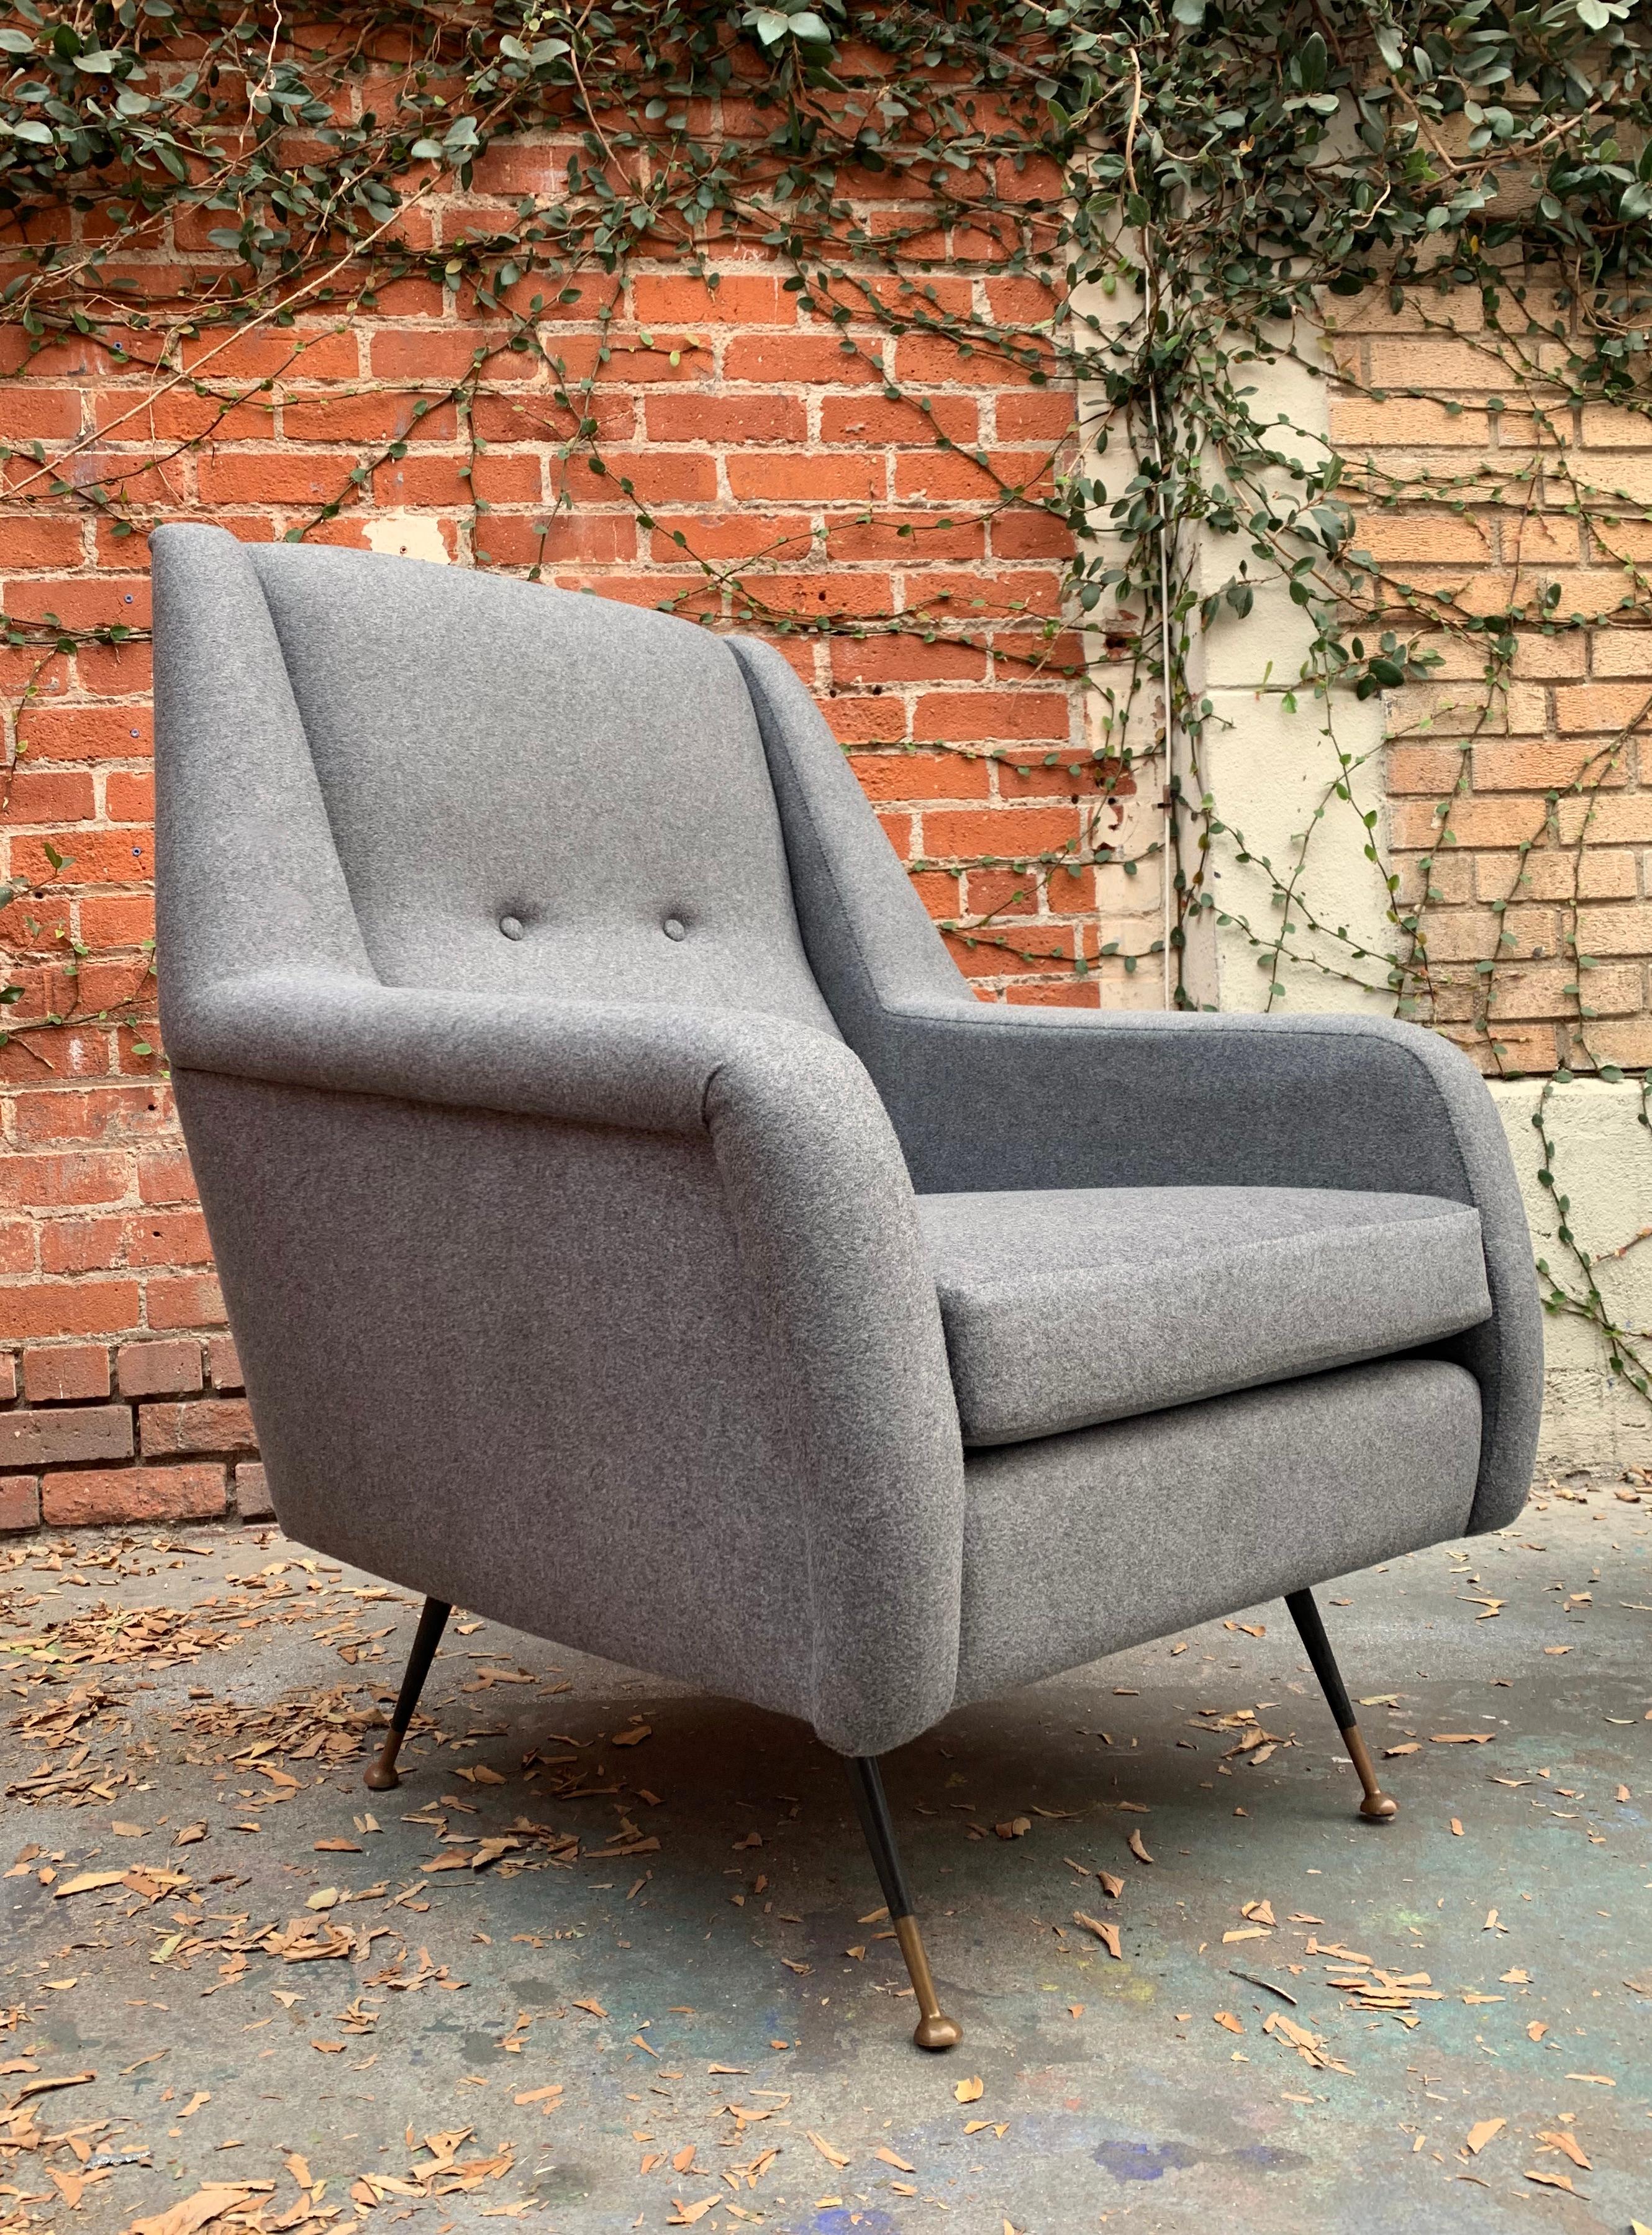 Wool Pair of Italian Midcentury Tufted Chairs by Ico Parisi in Grey Flannel